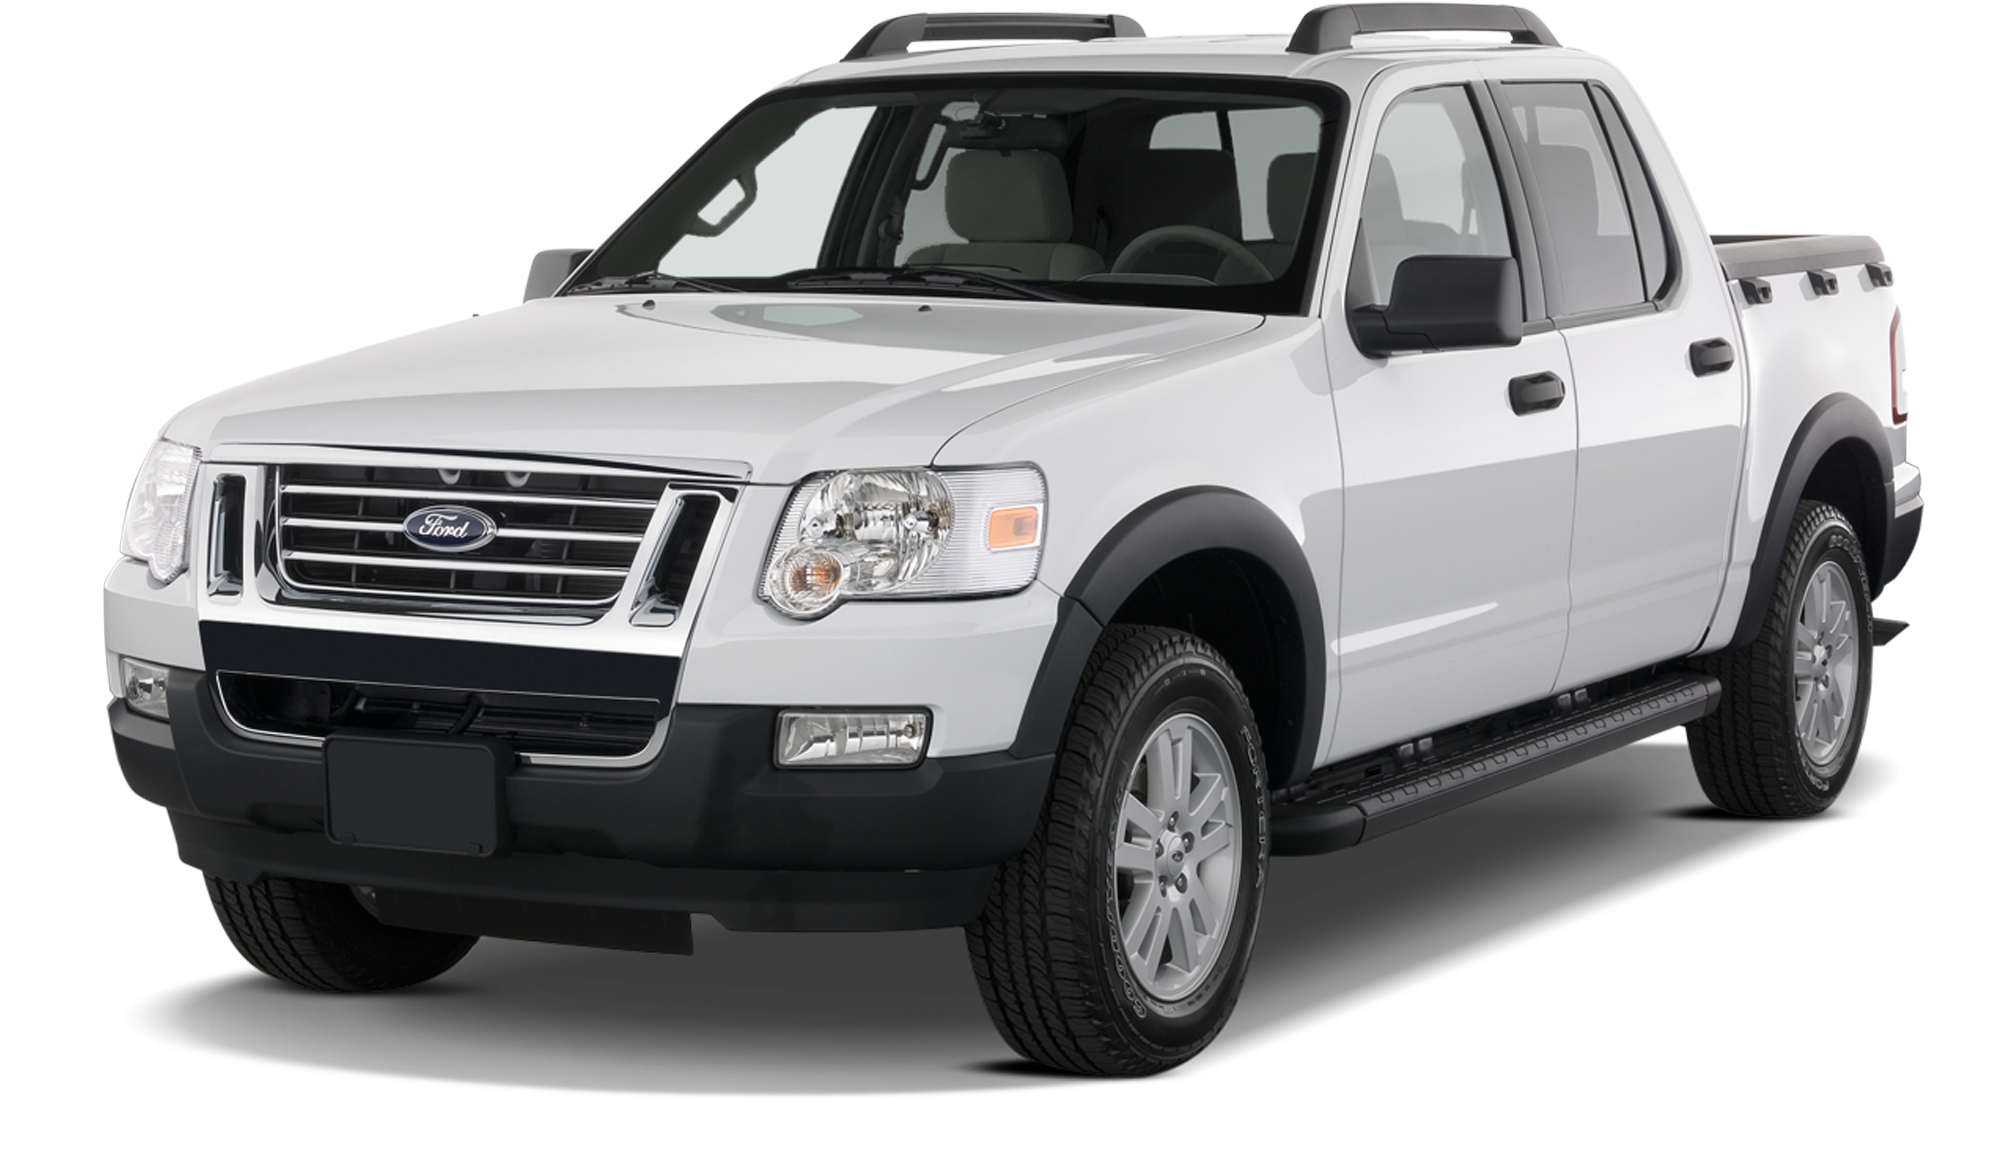 Ford Explorer Sport Trac 2008 (2013x1360), Png Download